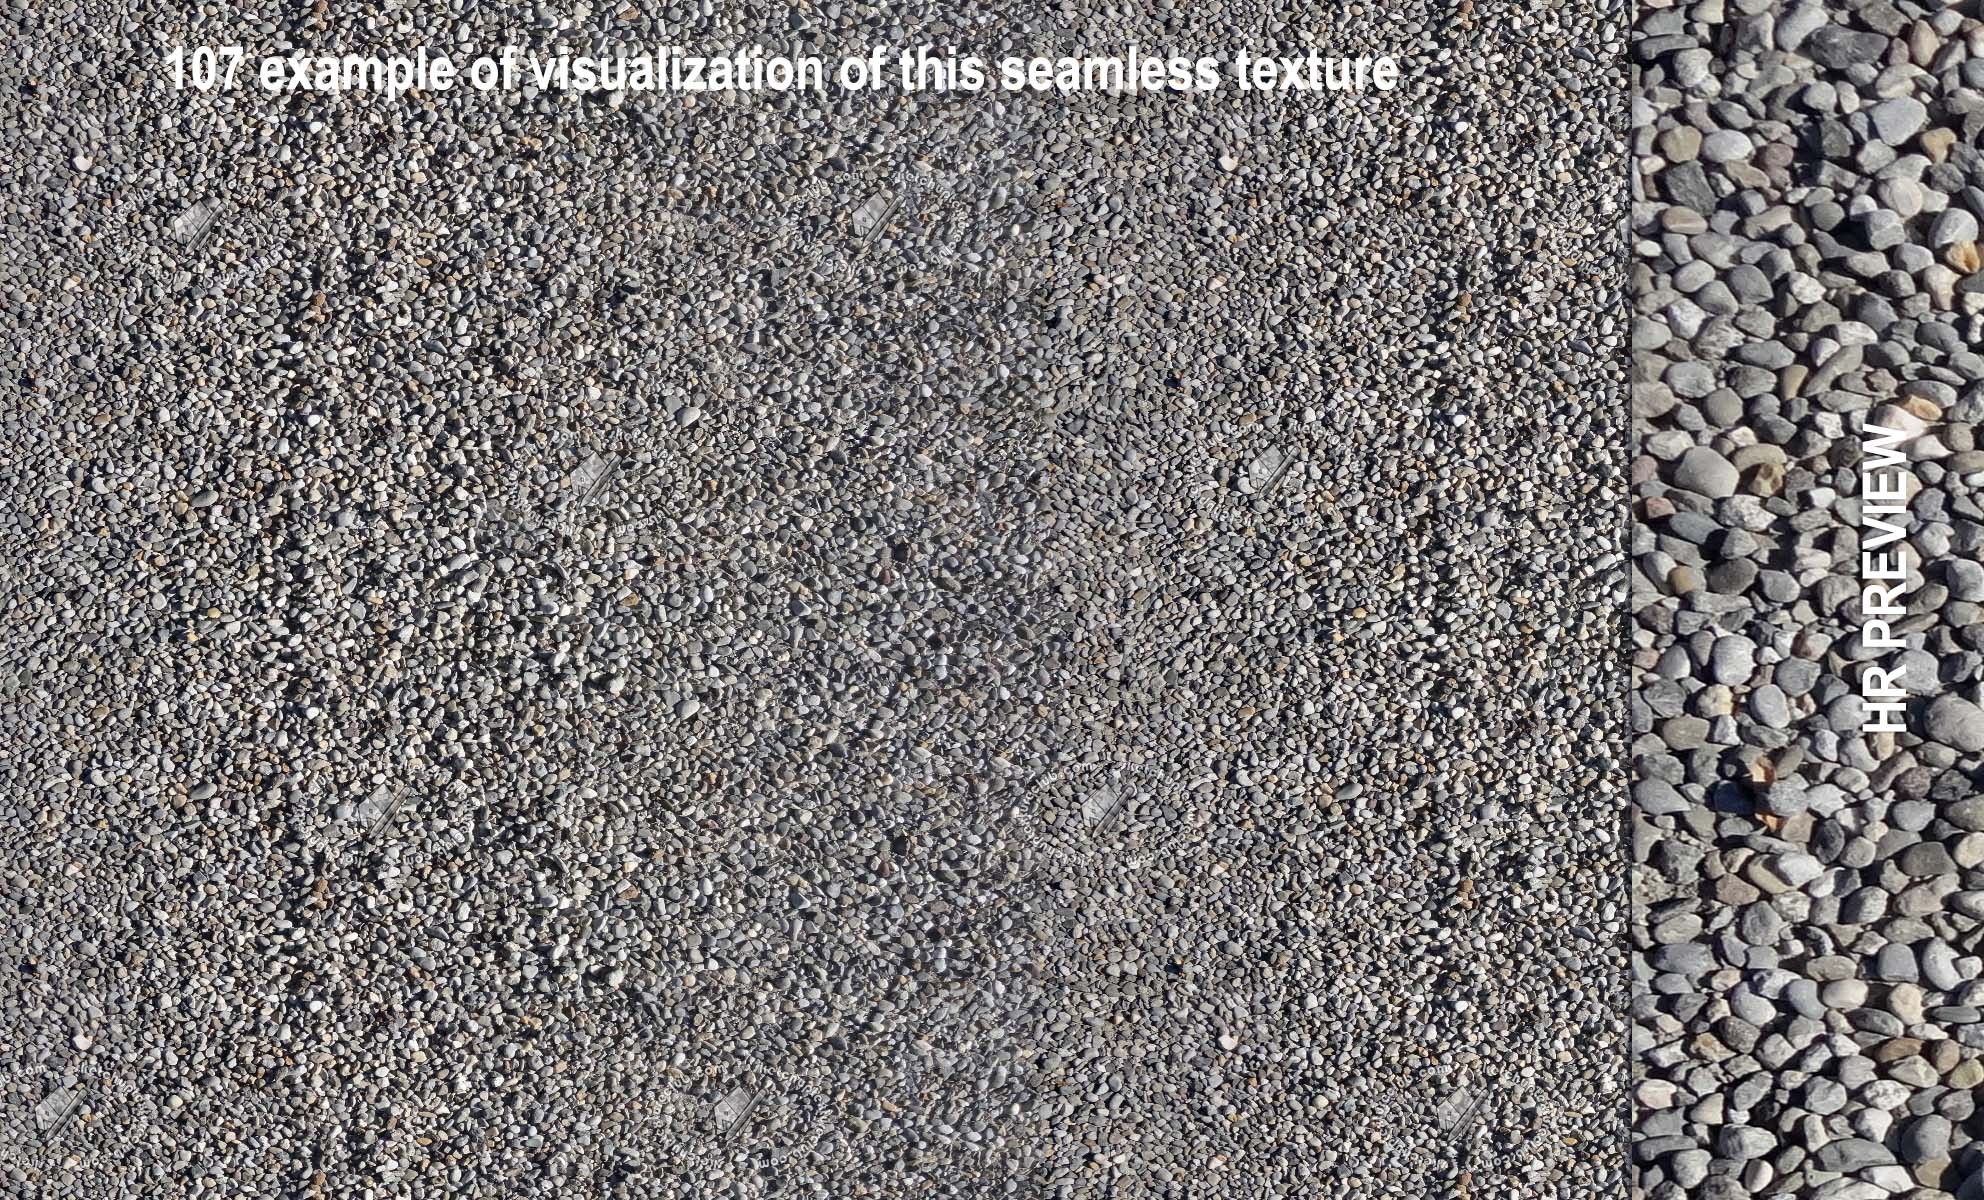 107-  example of visualization of this seamless texture